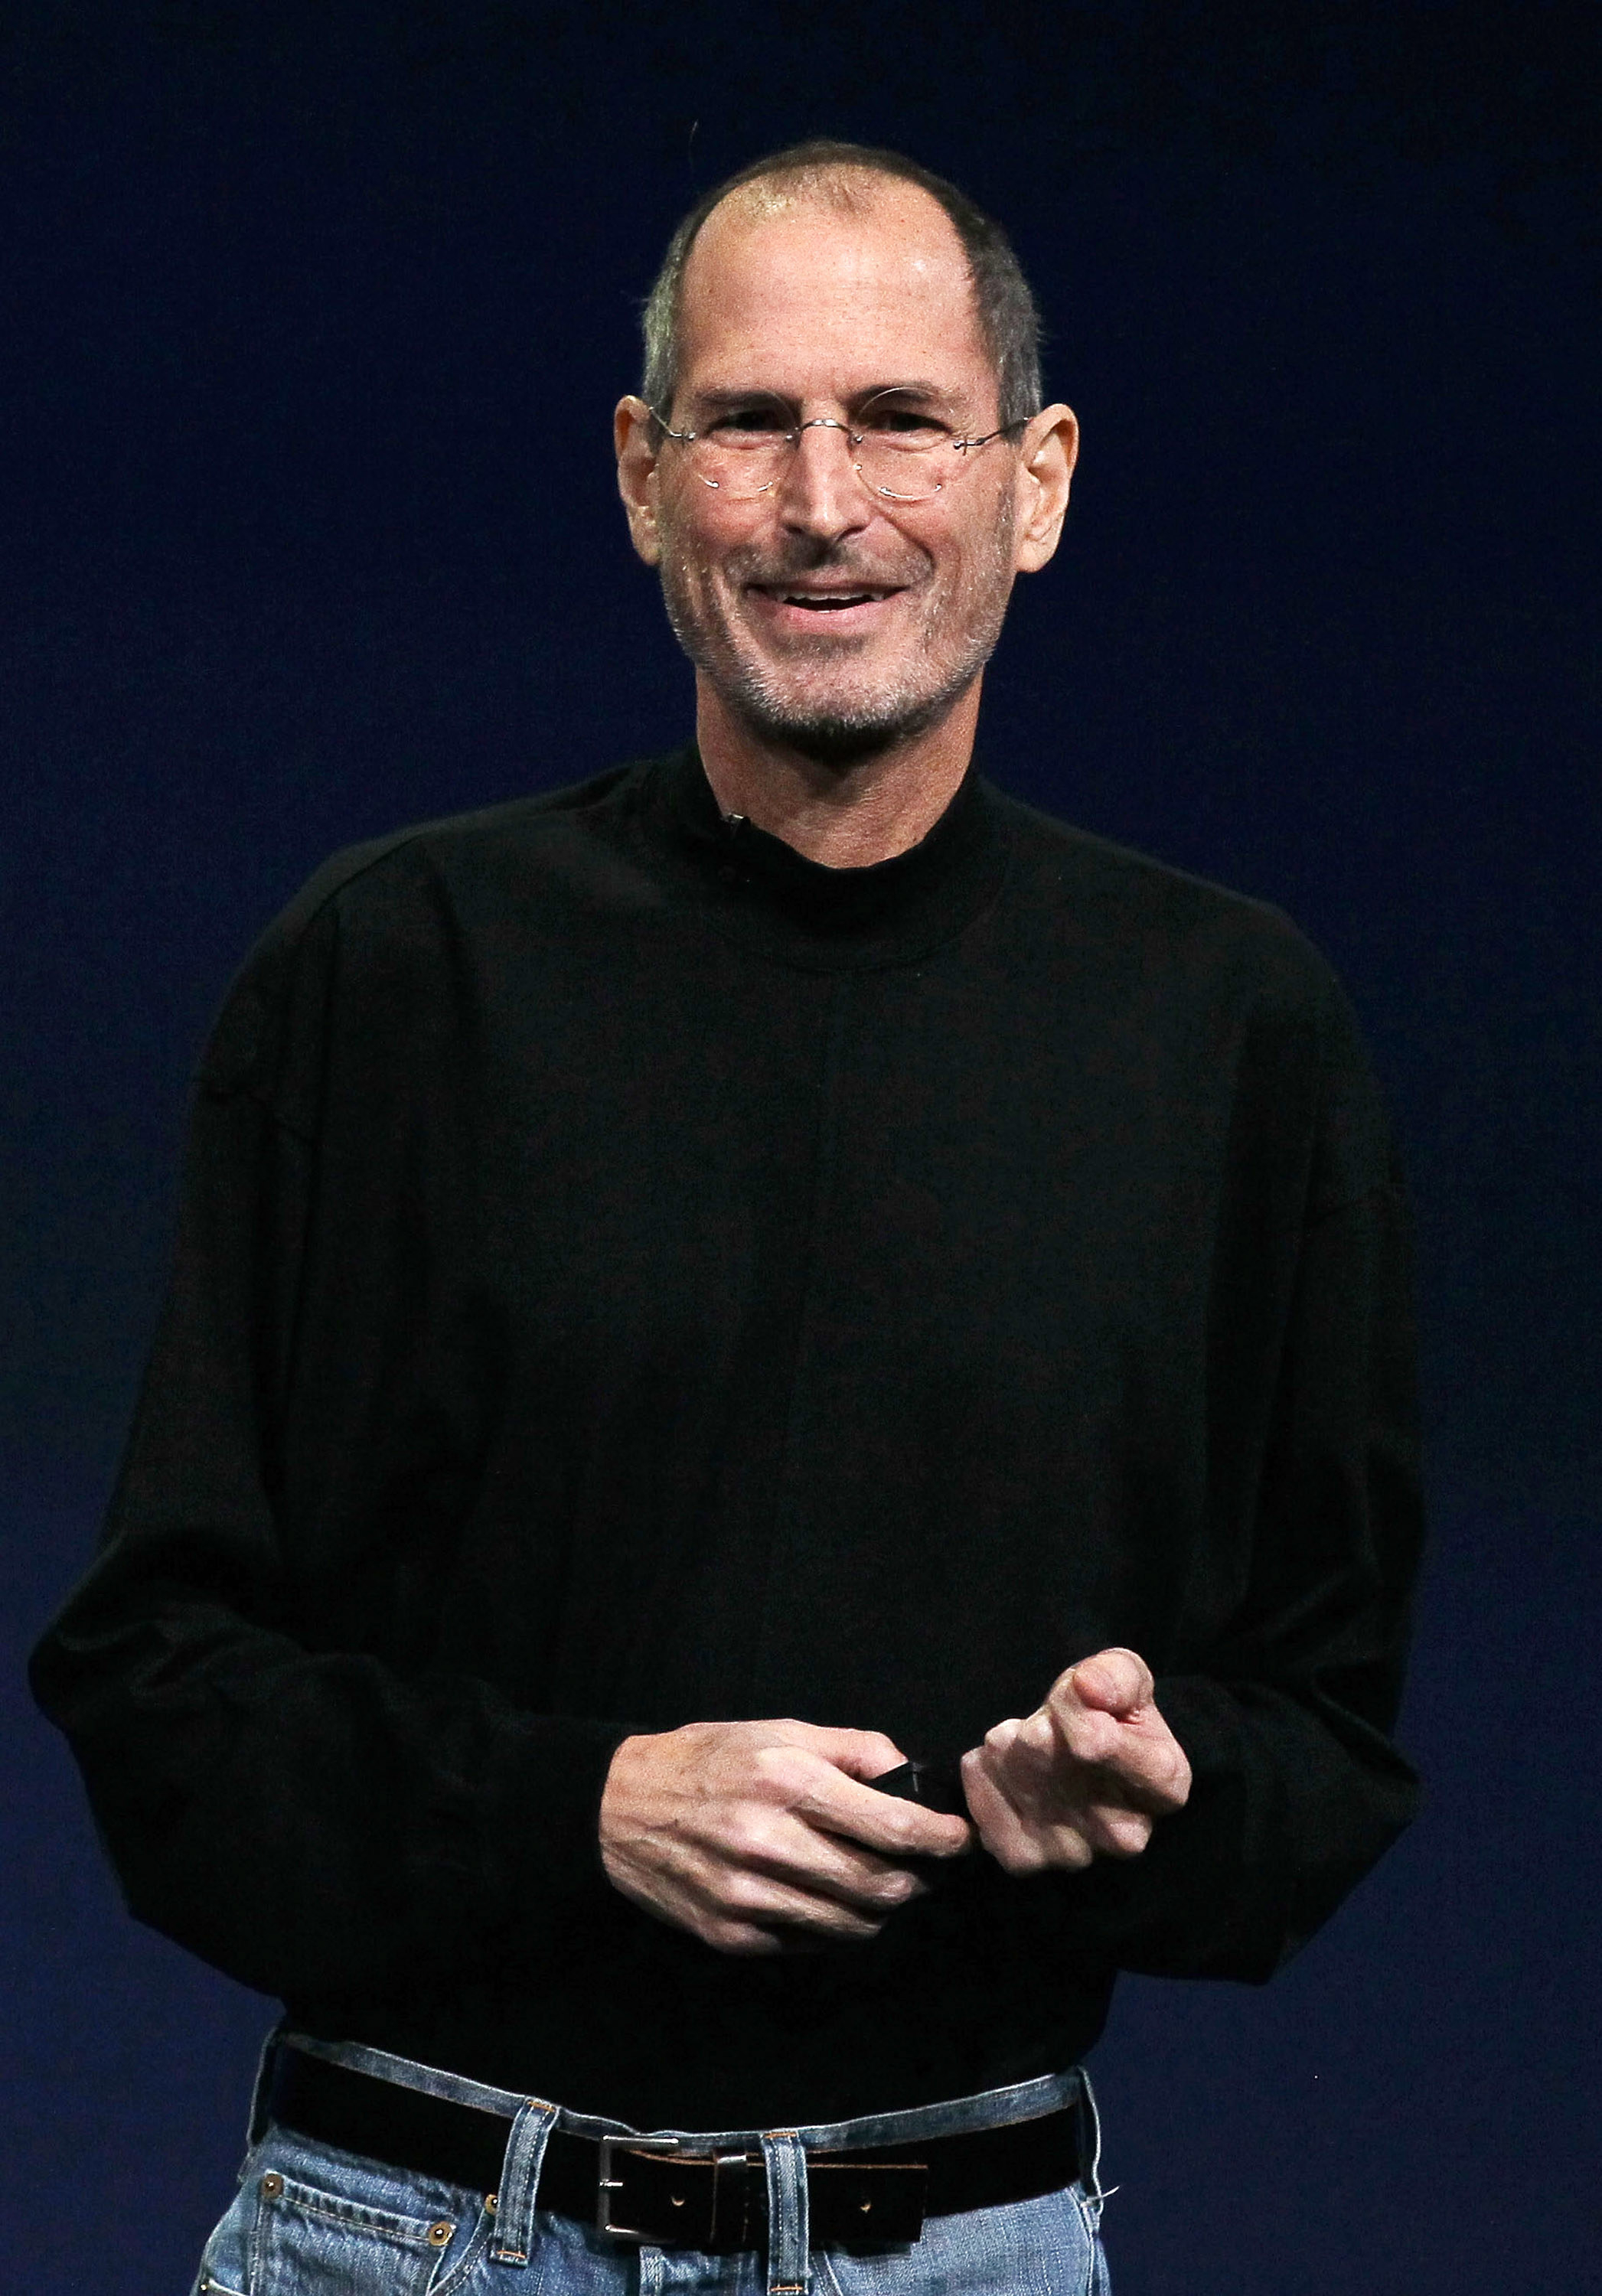 Steve Jobs appears on stage for an Apple event to reveal the iPad 2 on March 2, 2011